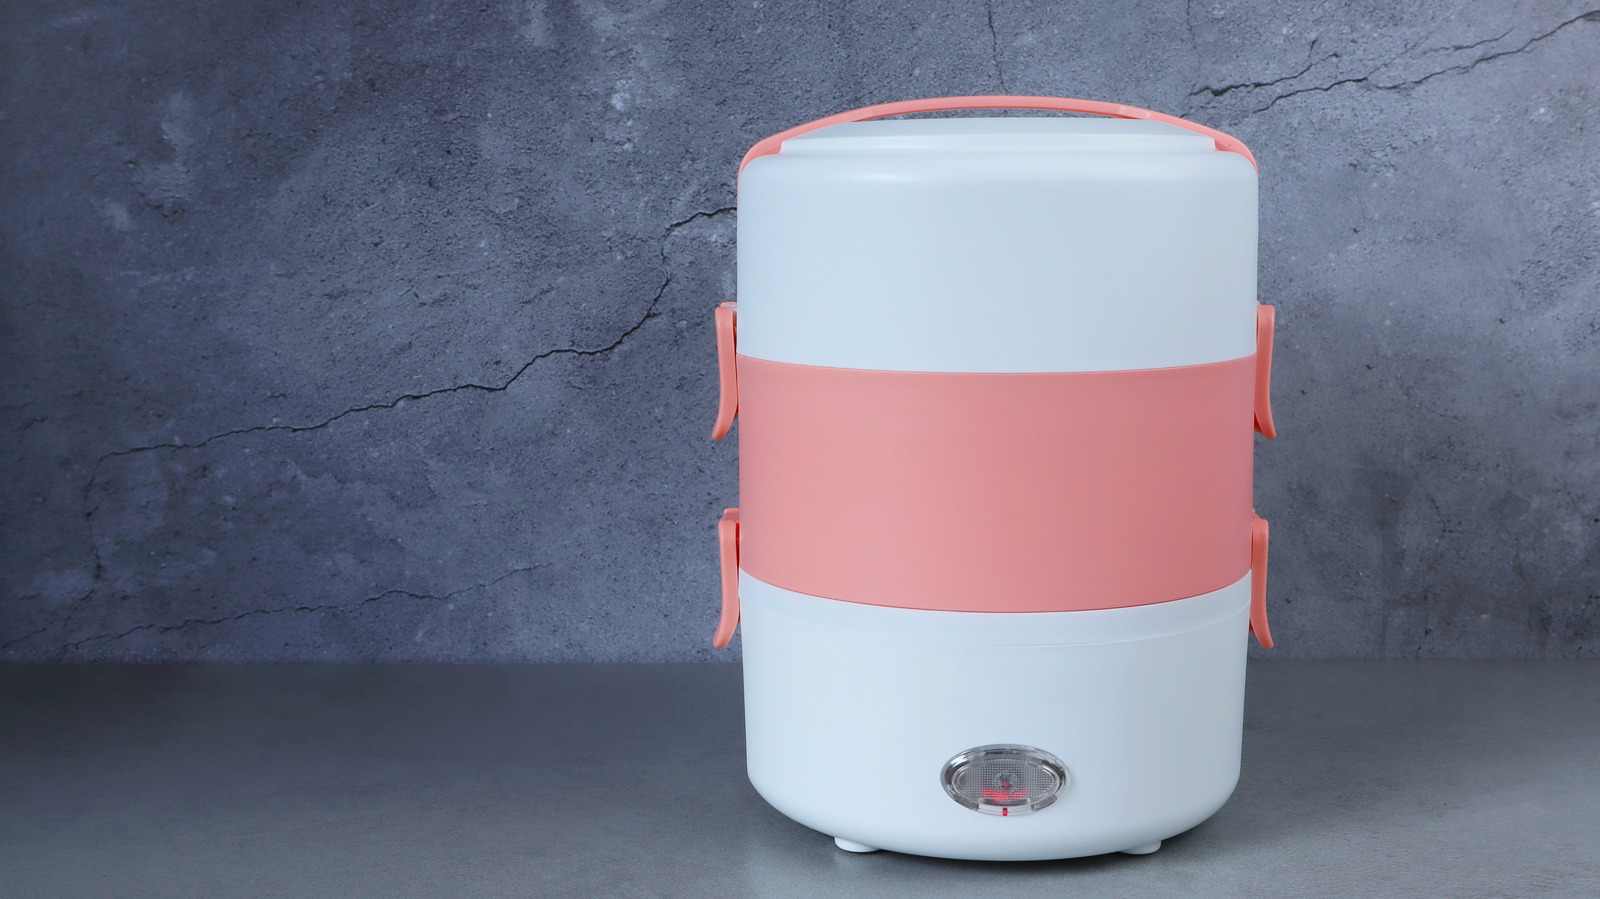 https://www.tastingtable.com/img/gallery/what-is-an-electric-lunch-box-and-how-does-it-work/l-intro-1675259640.jpg